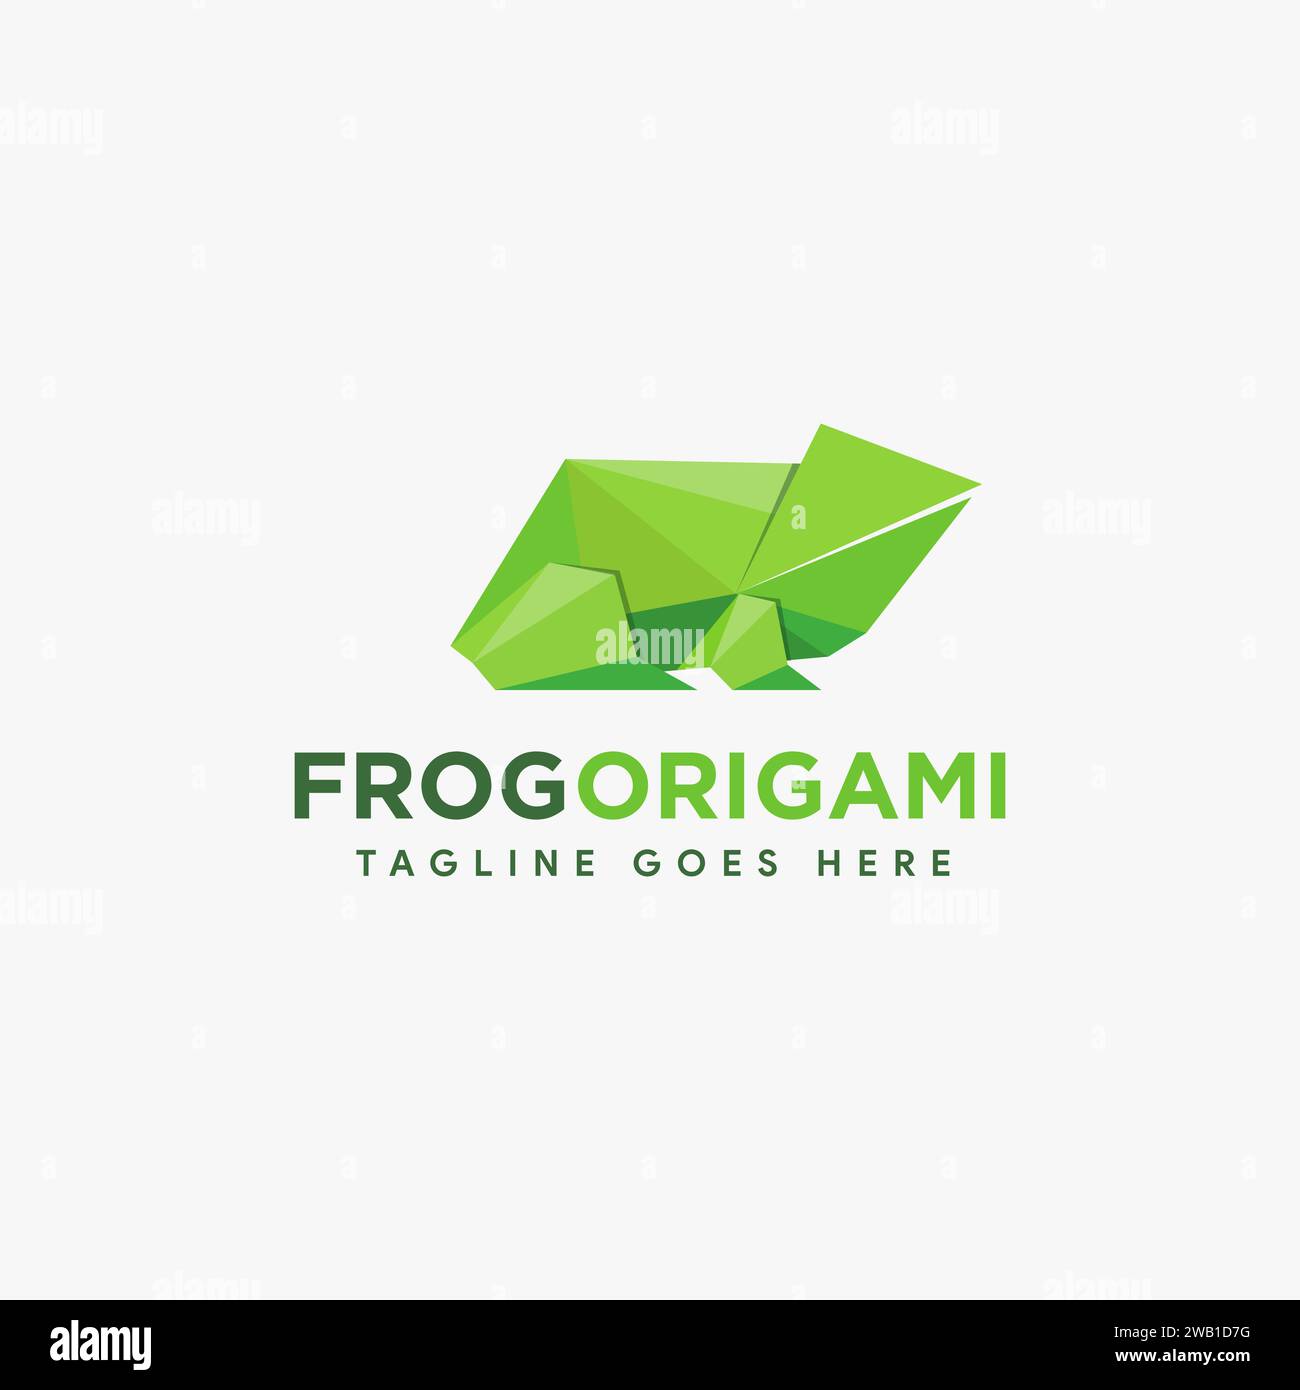 Frog origami logo icon with polygonal logo style Stock Vector